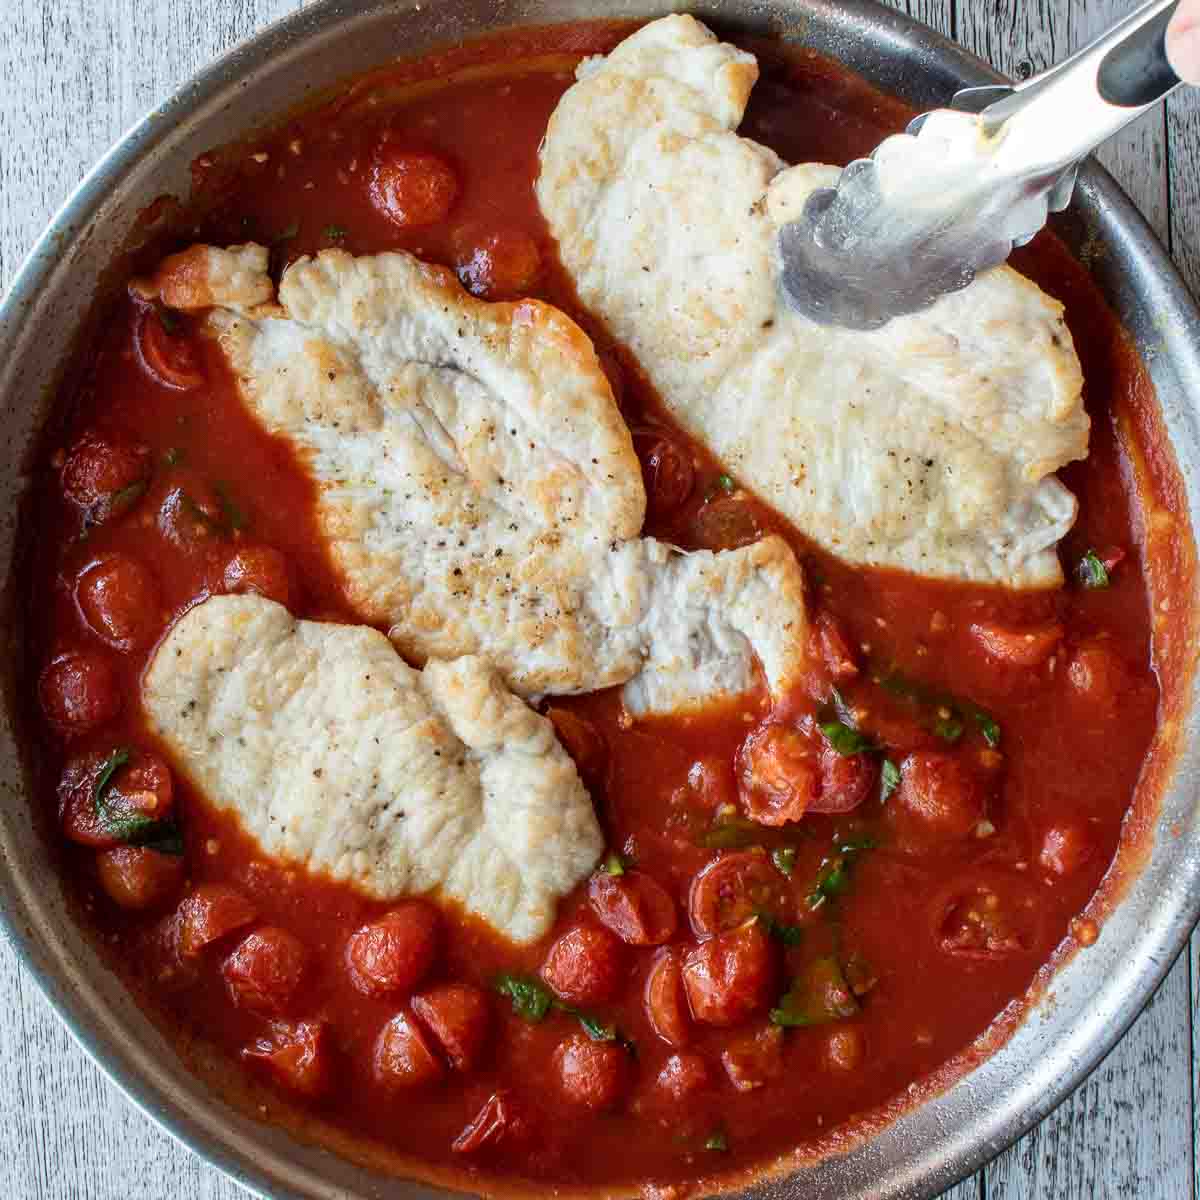 Chicken cutlets being added to a tomato sauce in a stainless steel pan.